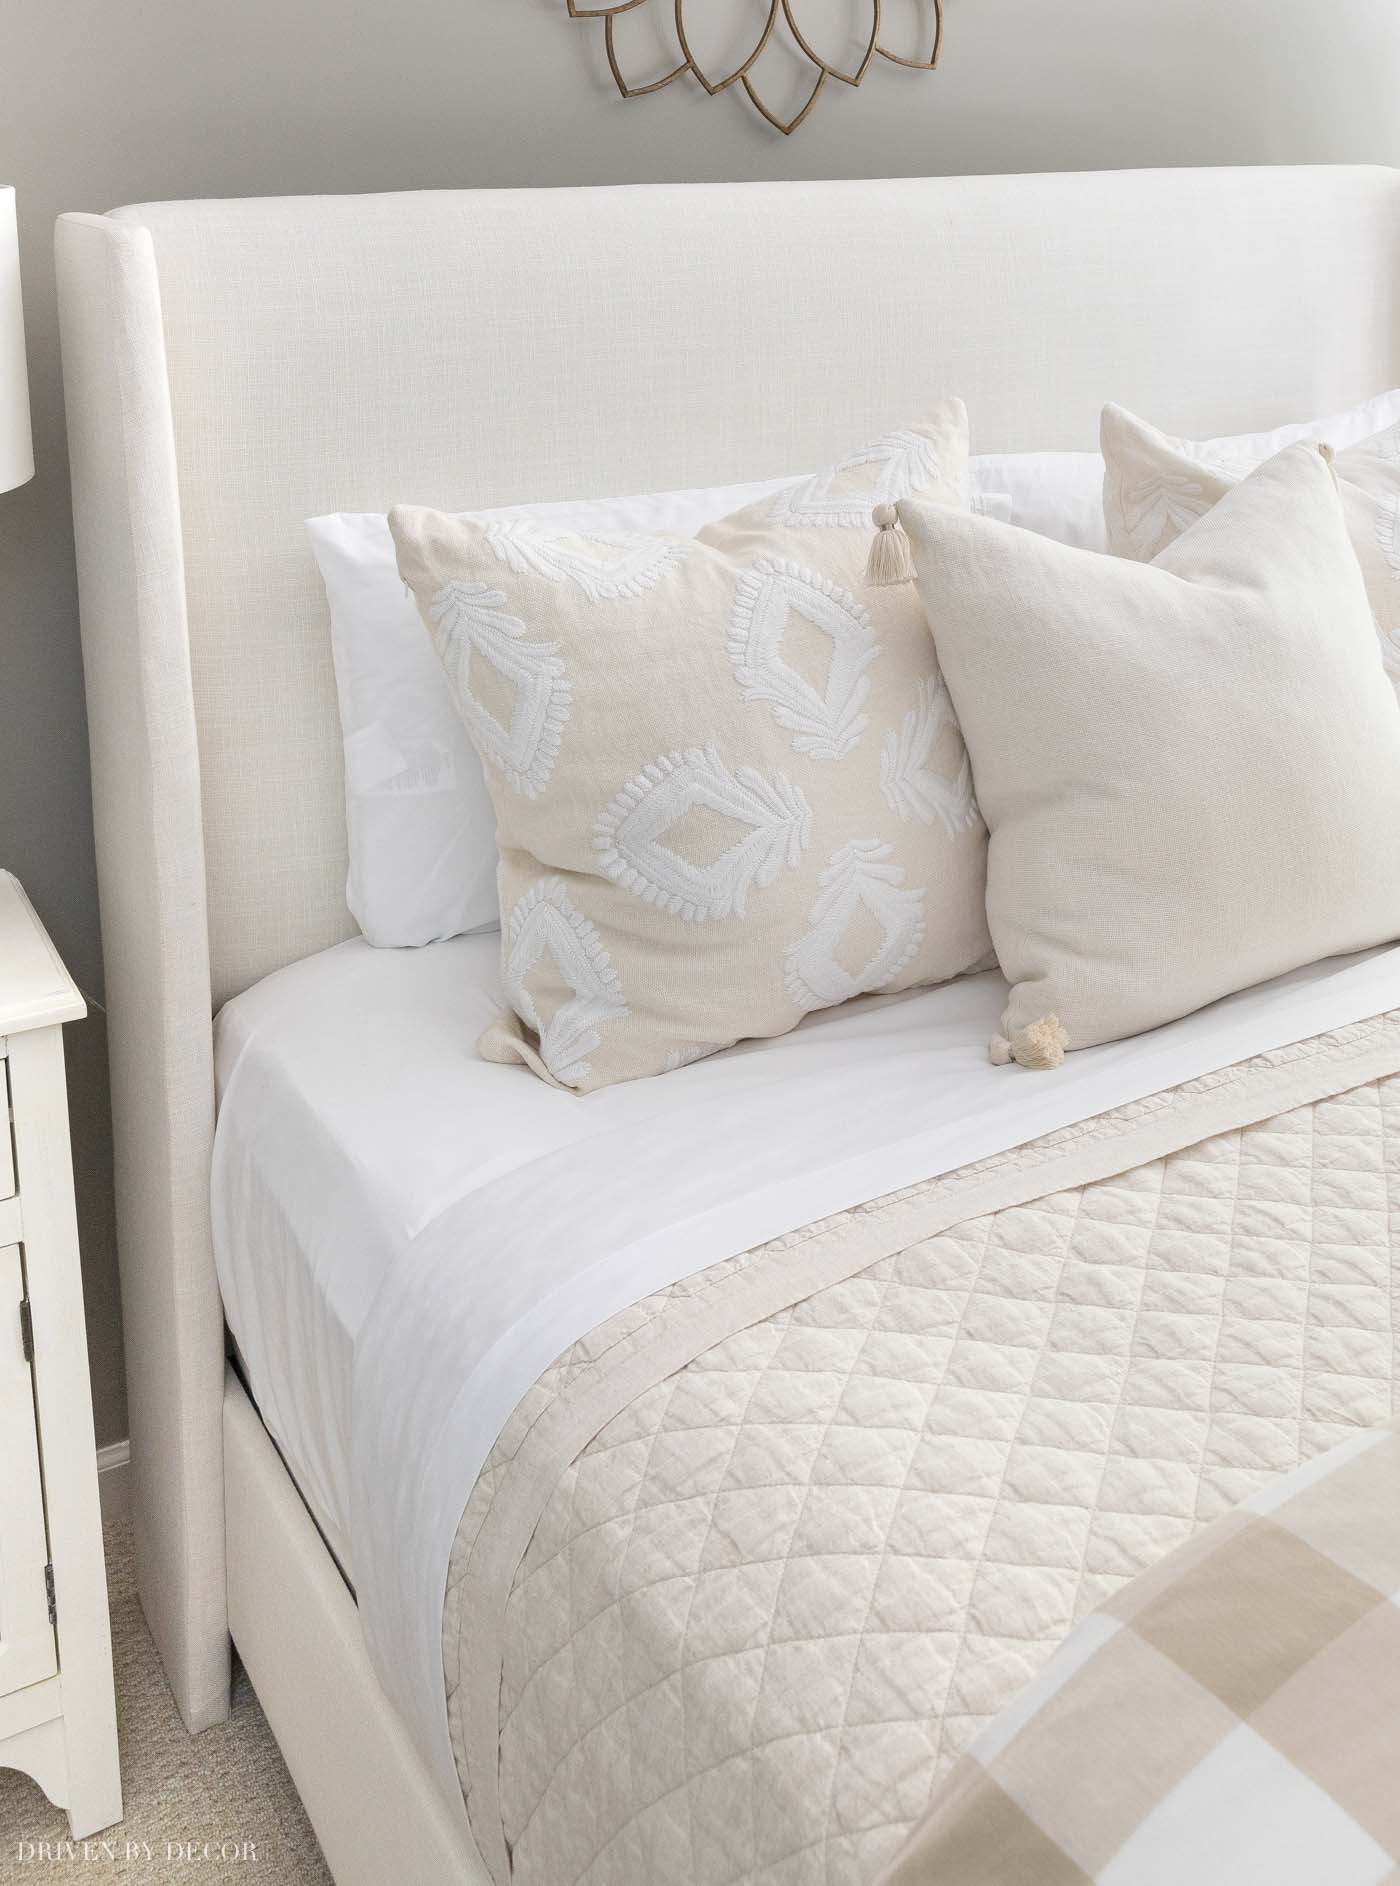 Tips For Making Your Bed With A Mattress Cover